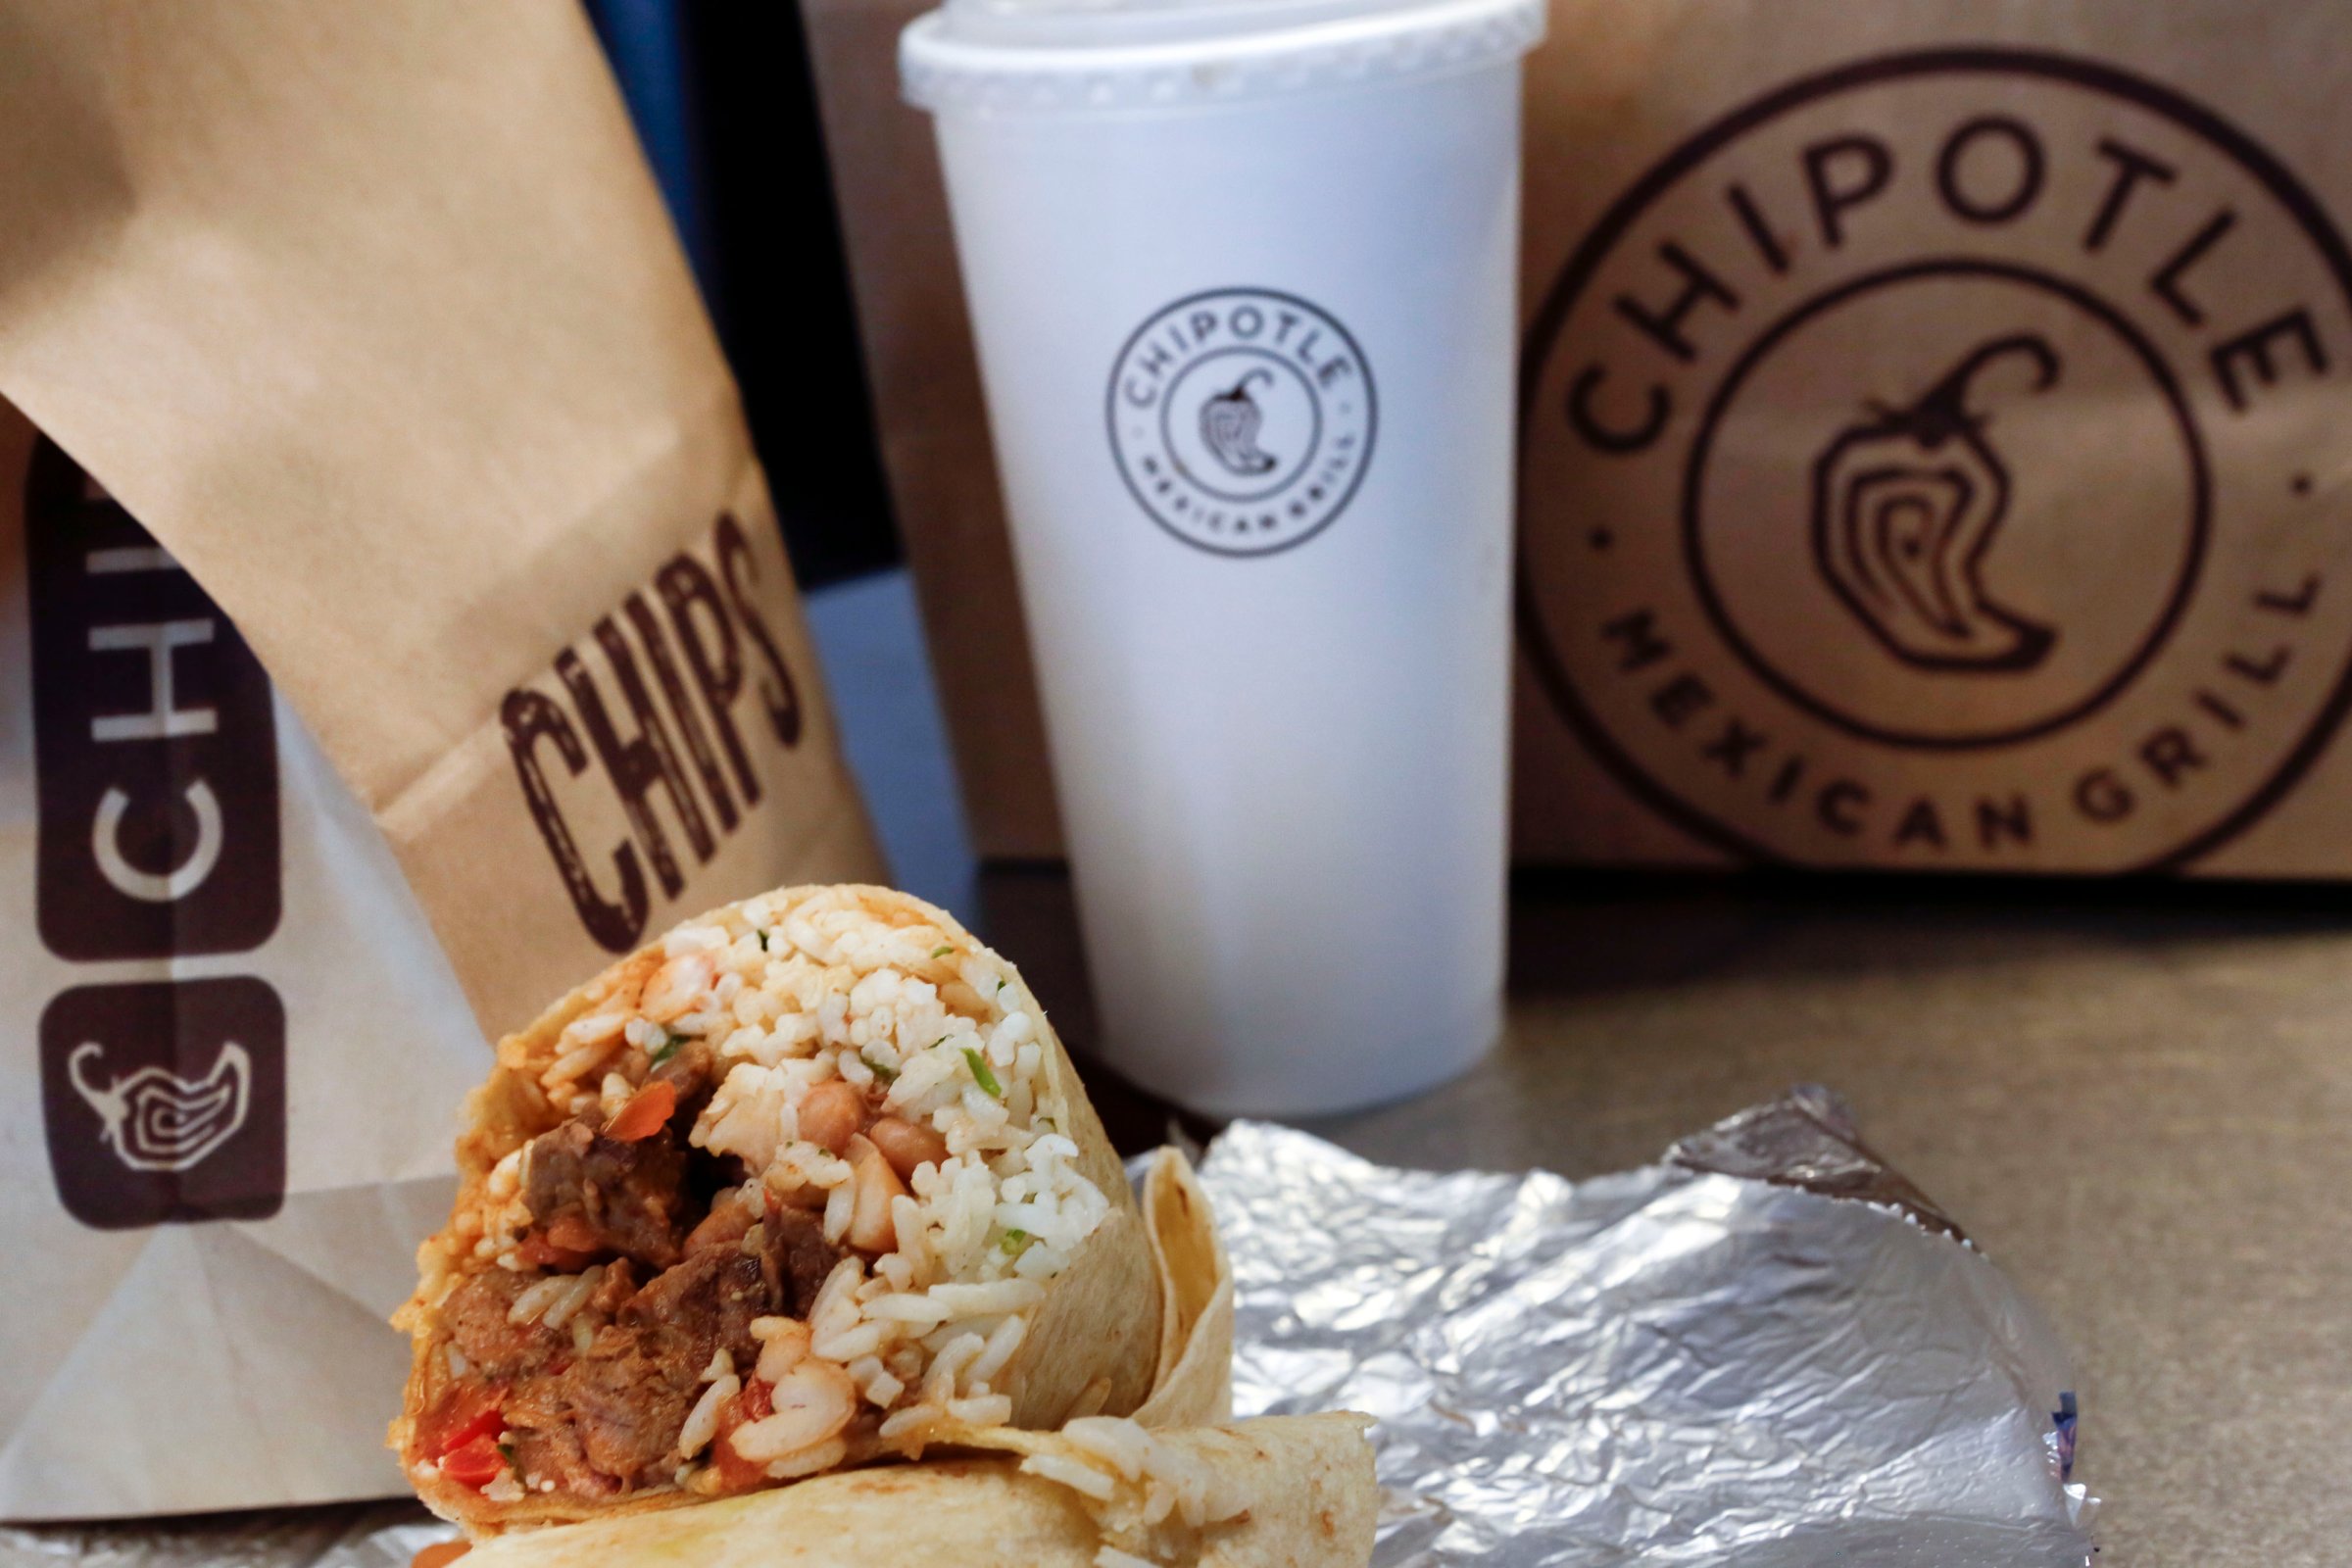 A steak burrito is arranged for a photograph with a drink and bags of chips at a Chipotle Mexican Grill Inc. restaurant in Hollywood, California, U.S., on Tuesday, July 16, 2013.